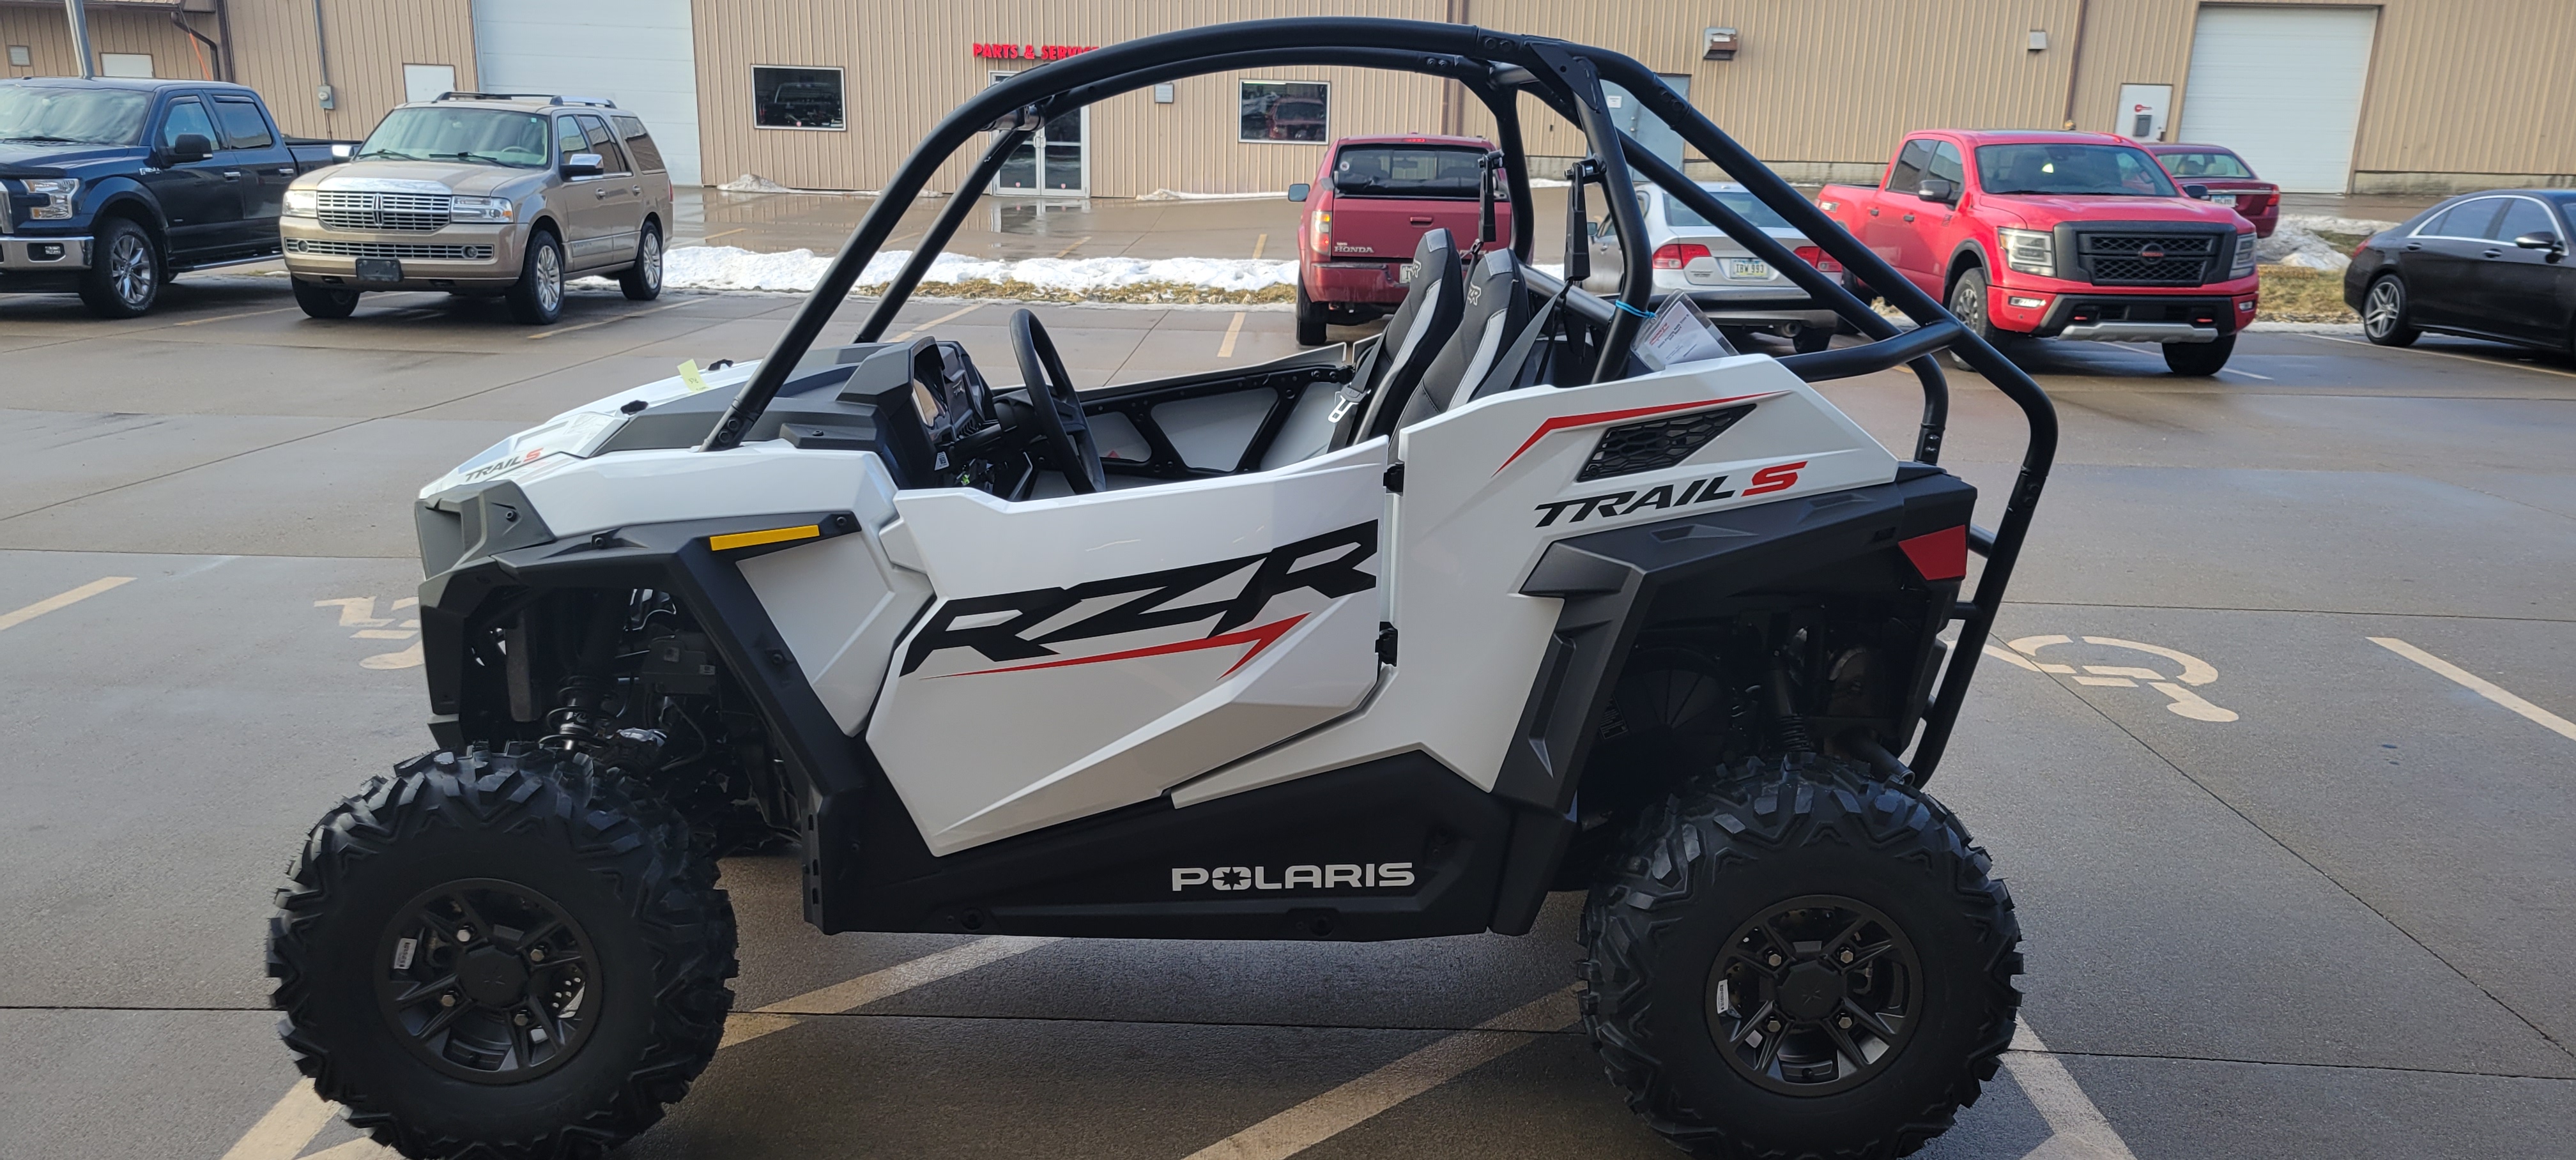 2023 Polaris RZR Trail S 900 Sport at Brenny's Motorcycle Clinic, Bettendorf, IA 52722